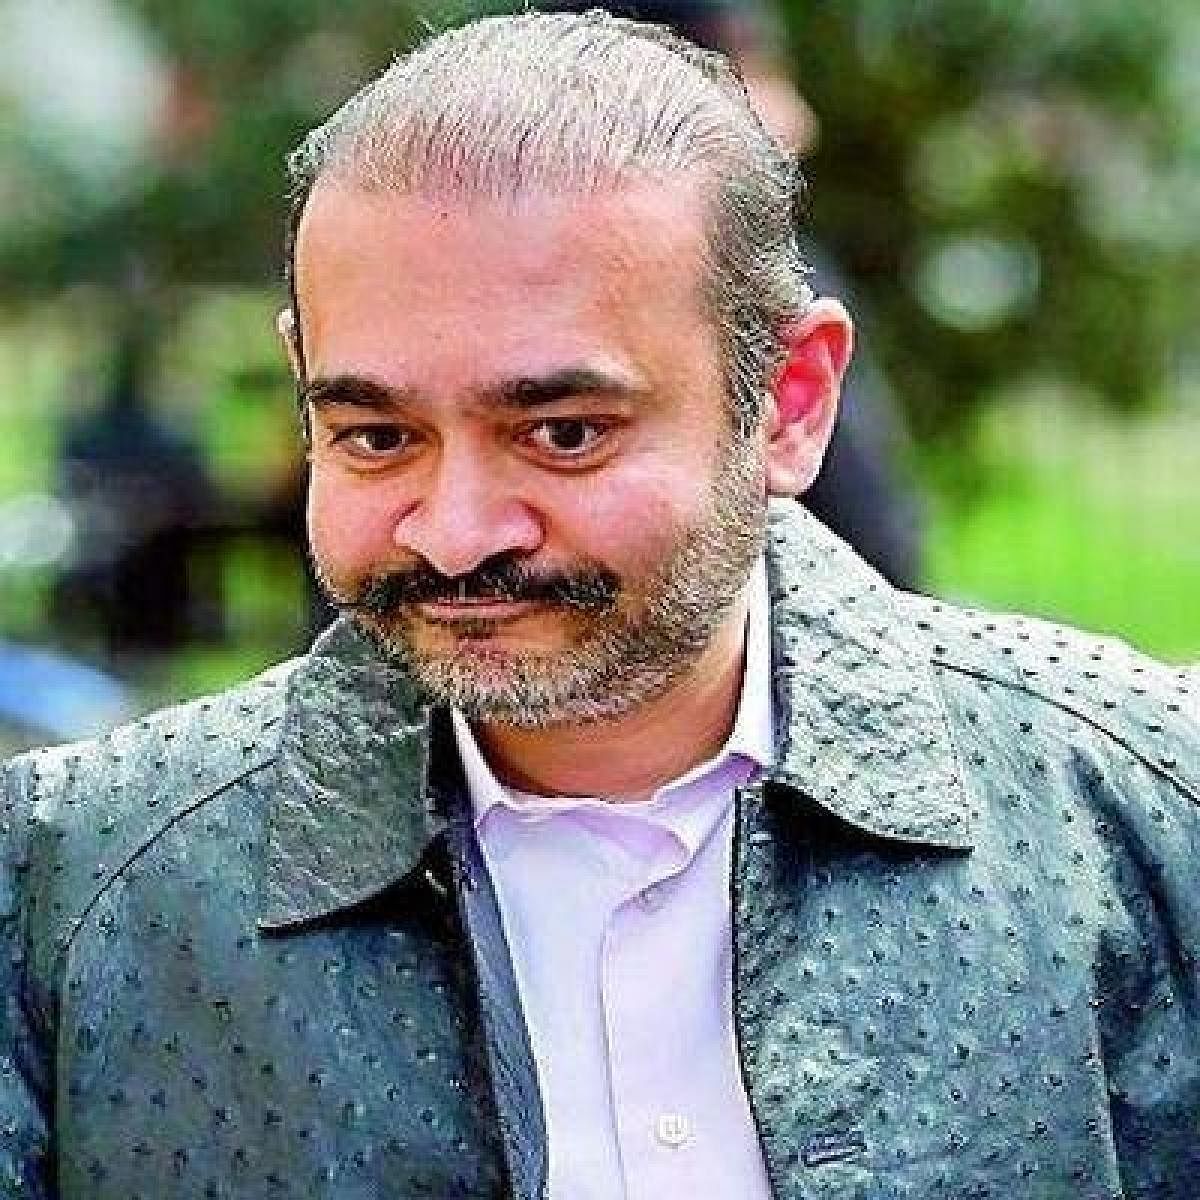 Nirav Modi was declared a "fugitive economic offender" under the Fugitive Economic Offenders Act by a special court set up under the Prevention of Money Laundering Act (PMLA). (File Photo)